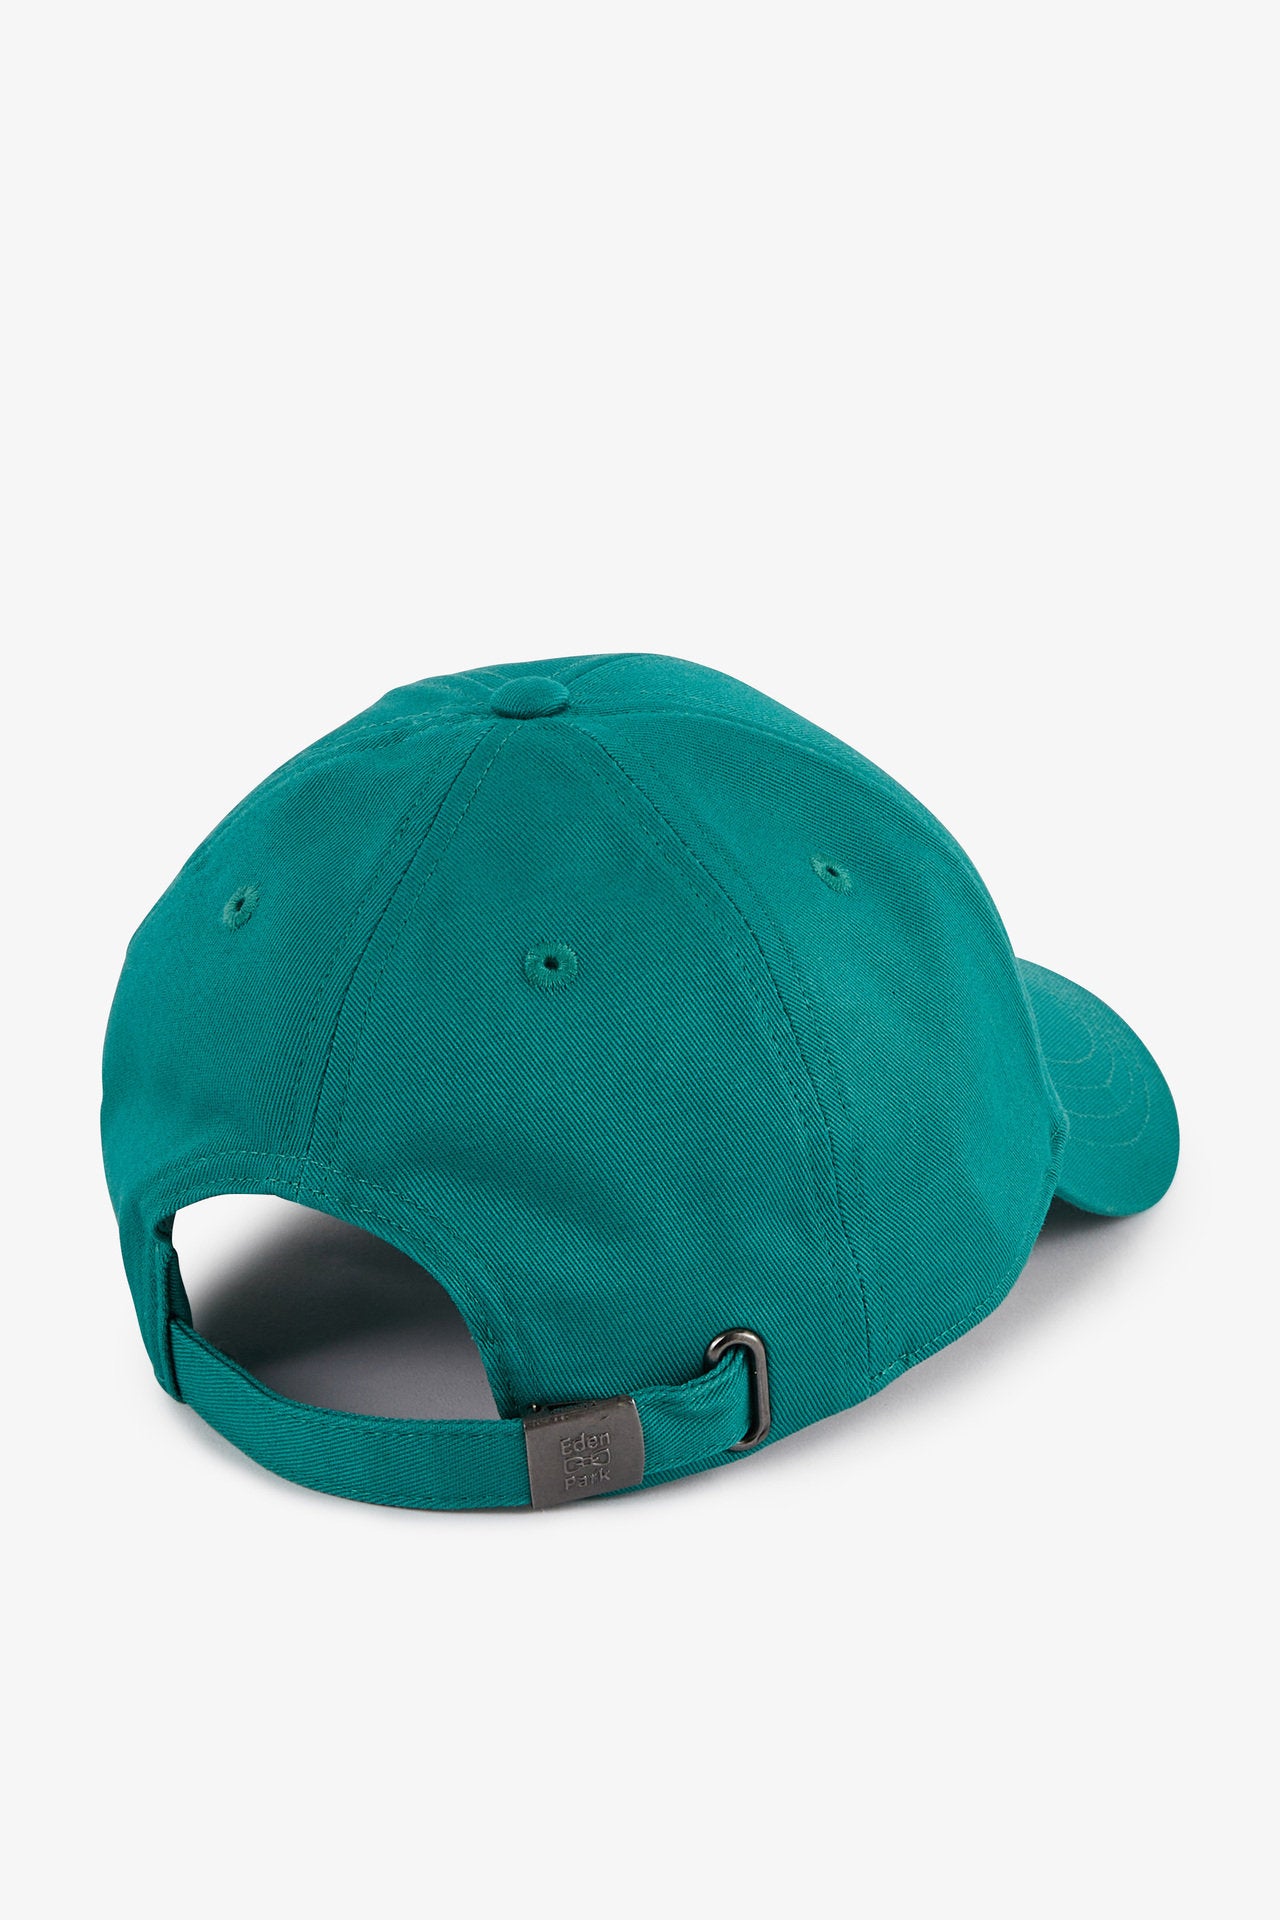 Green Cotton Canvas Cap With Bow Tie Embroidery_E24CHACA0001_VEM32_02